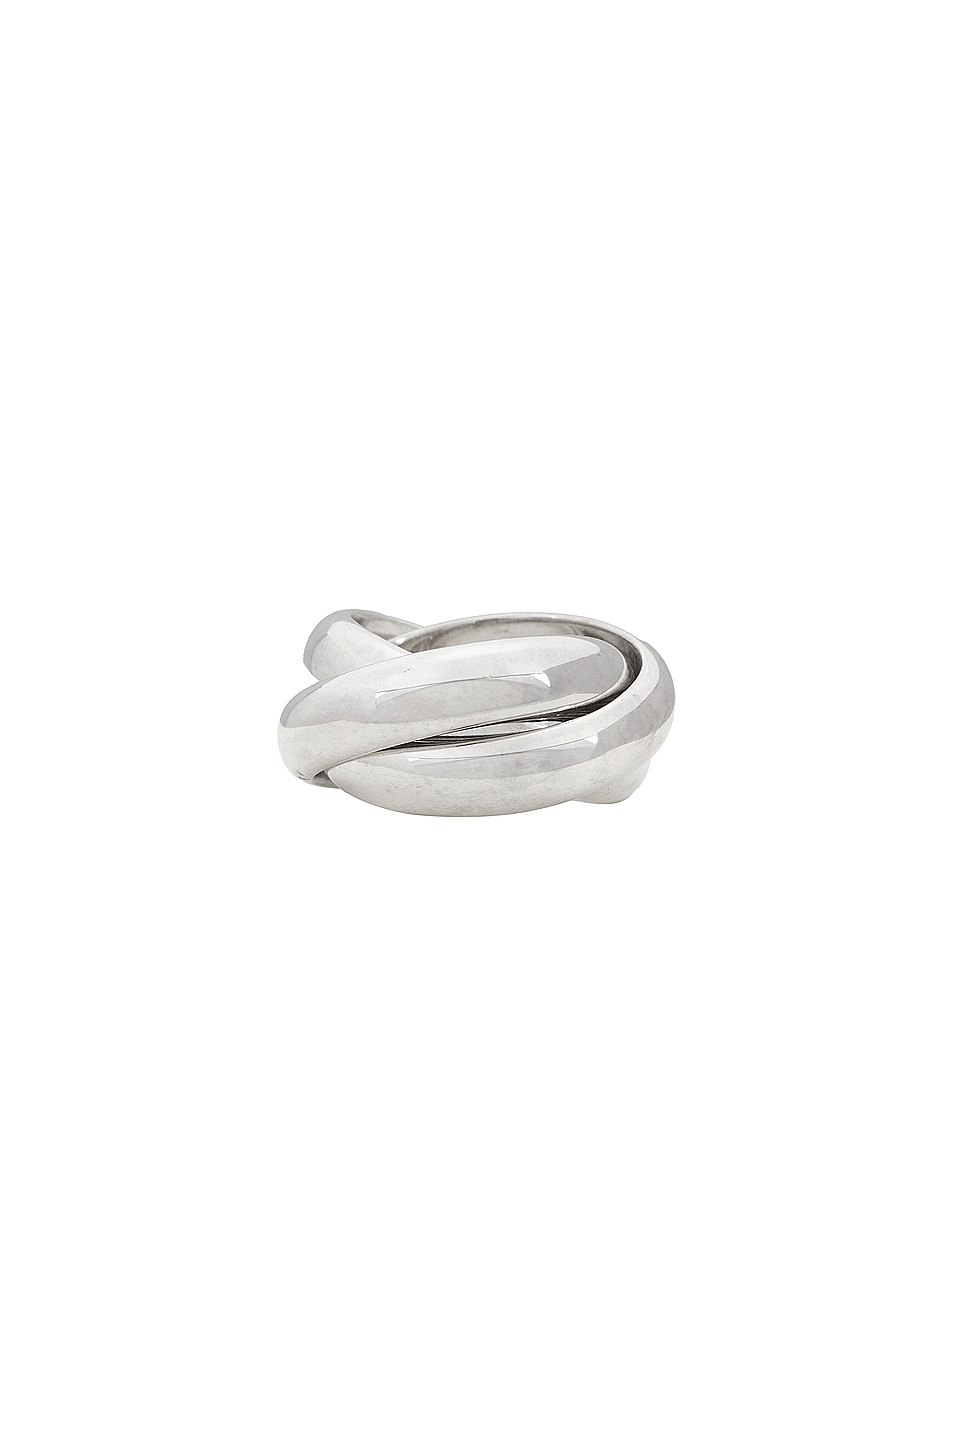 Image 1 of Lie Studio The Sofie Ring in Sterling Silver